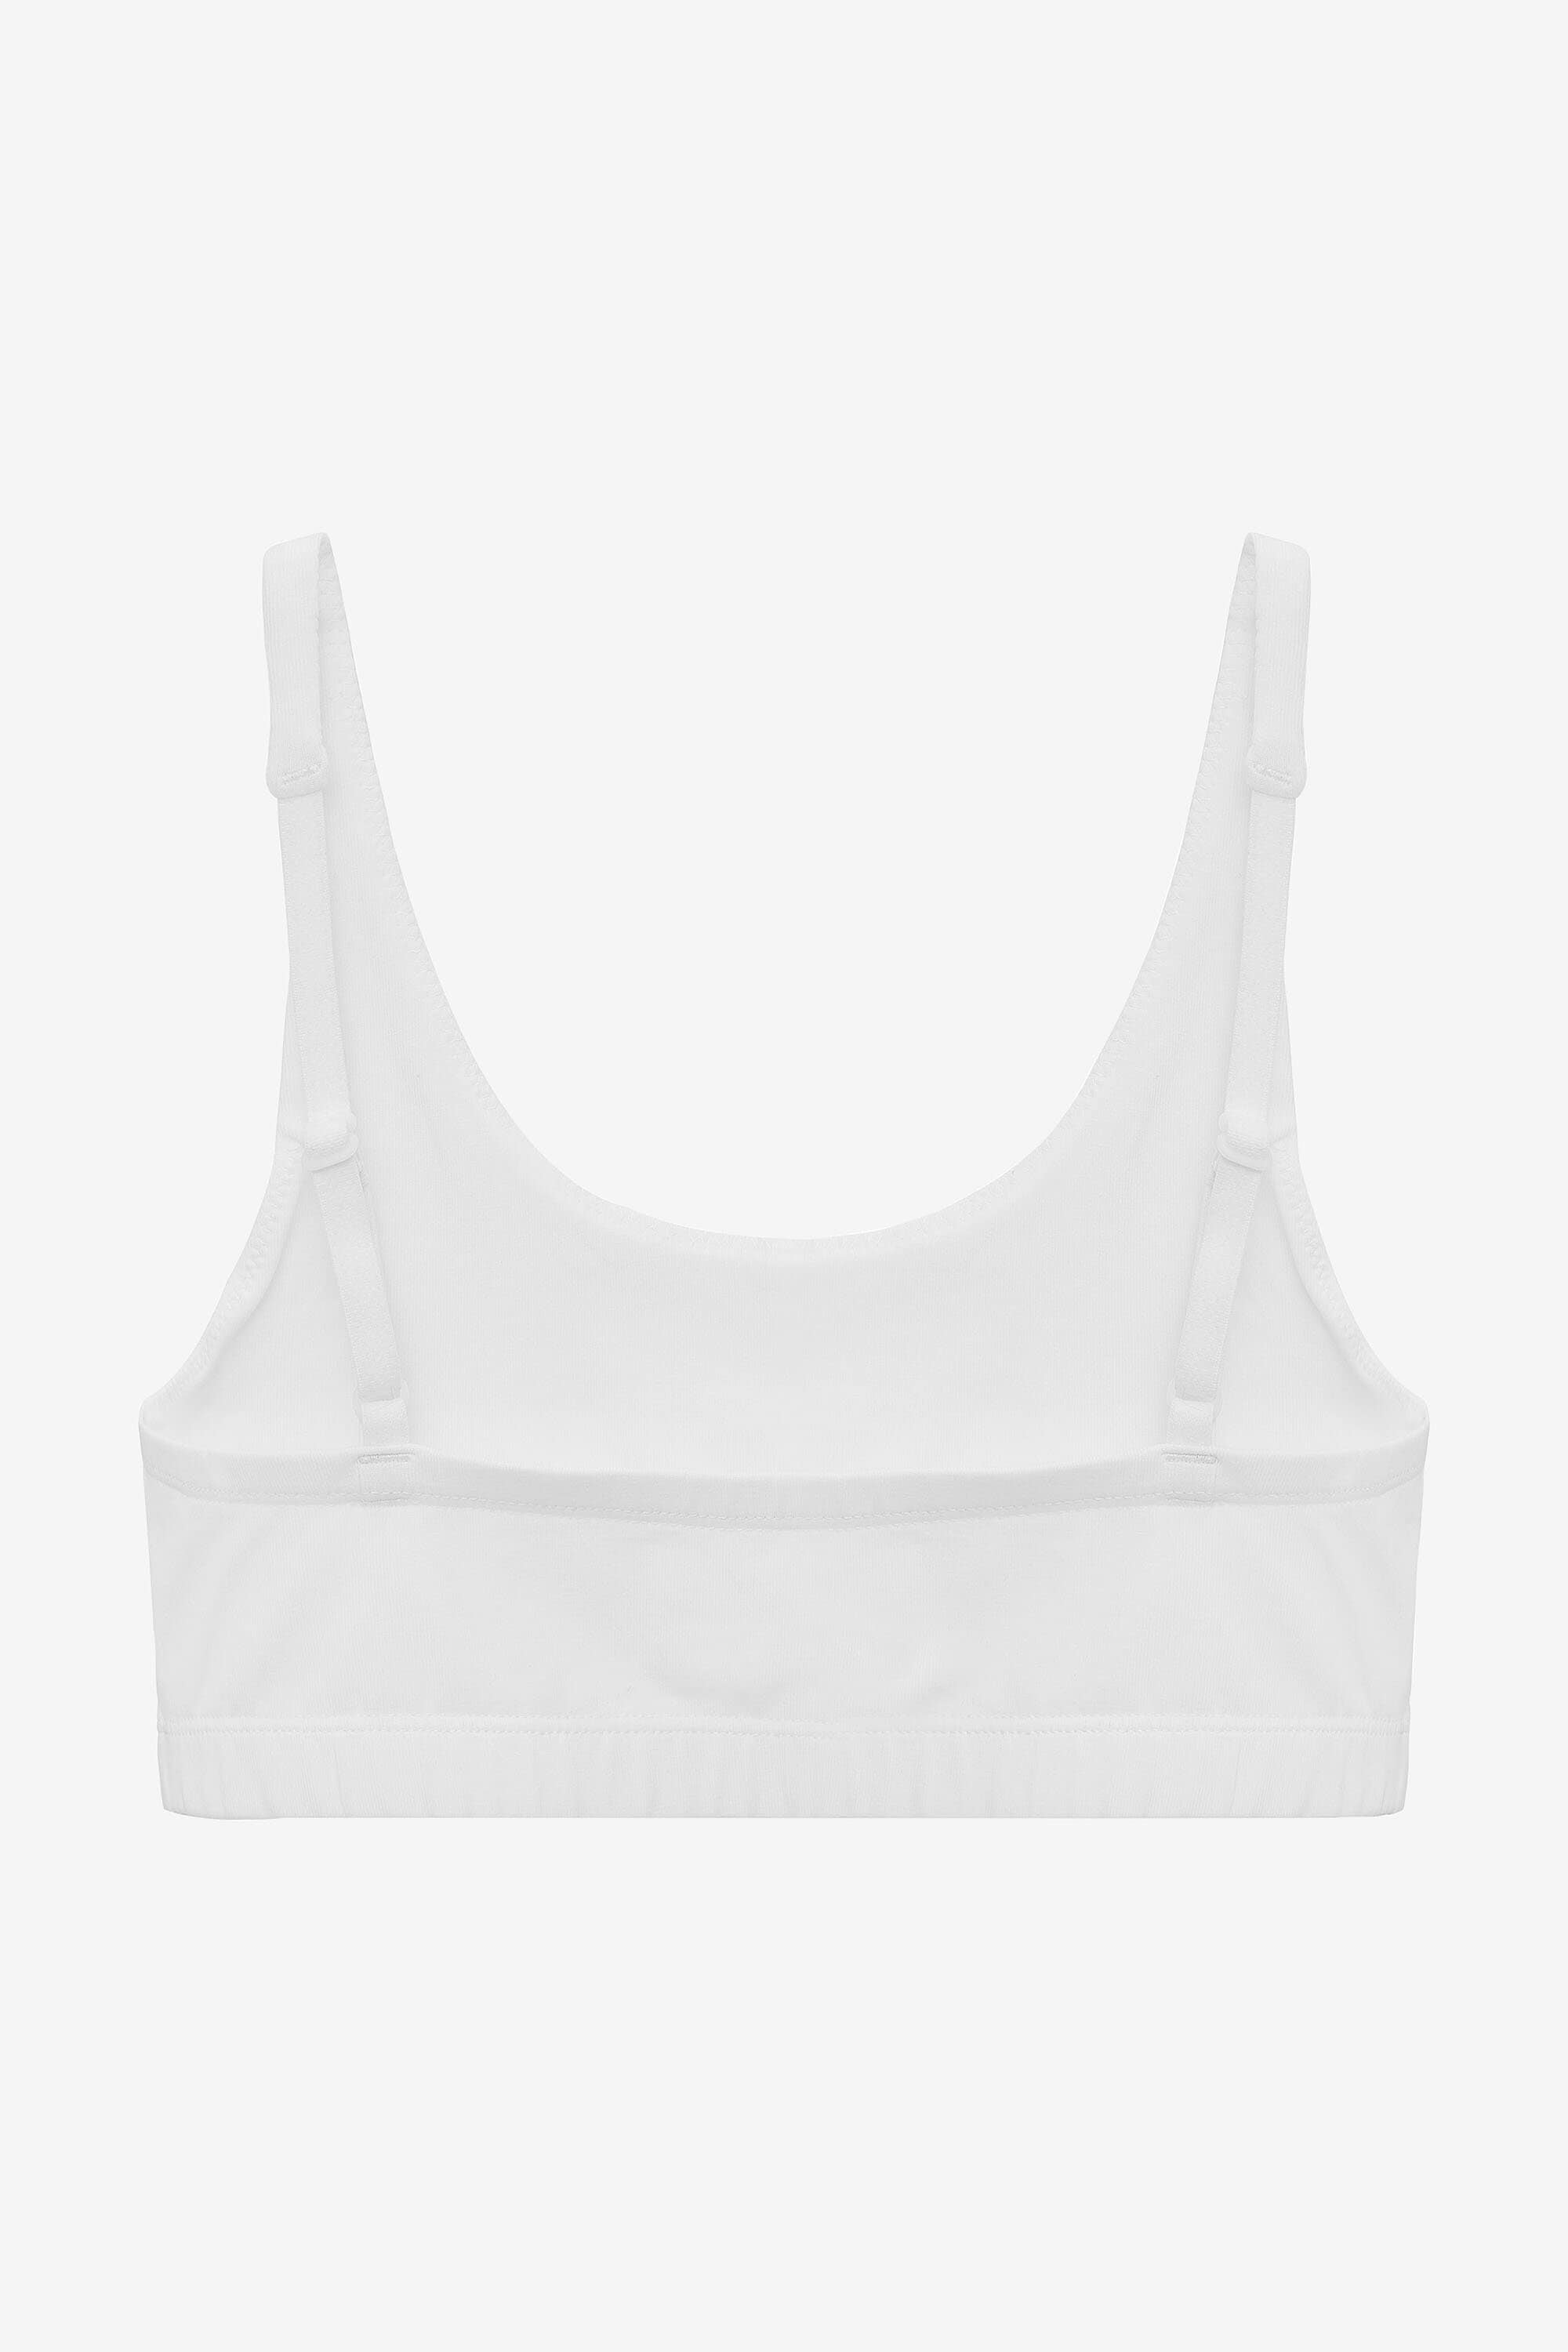 Non-Padded Hobby Janta Cotton Bra, White at Rs 36/piece in